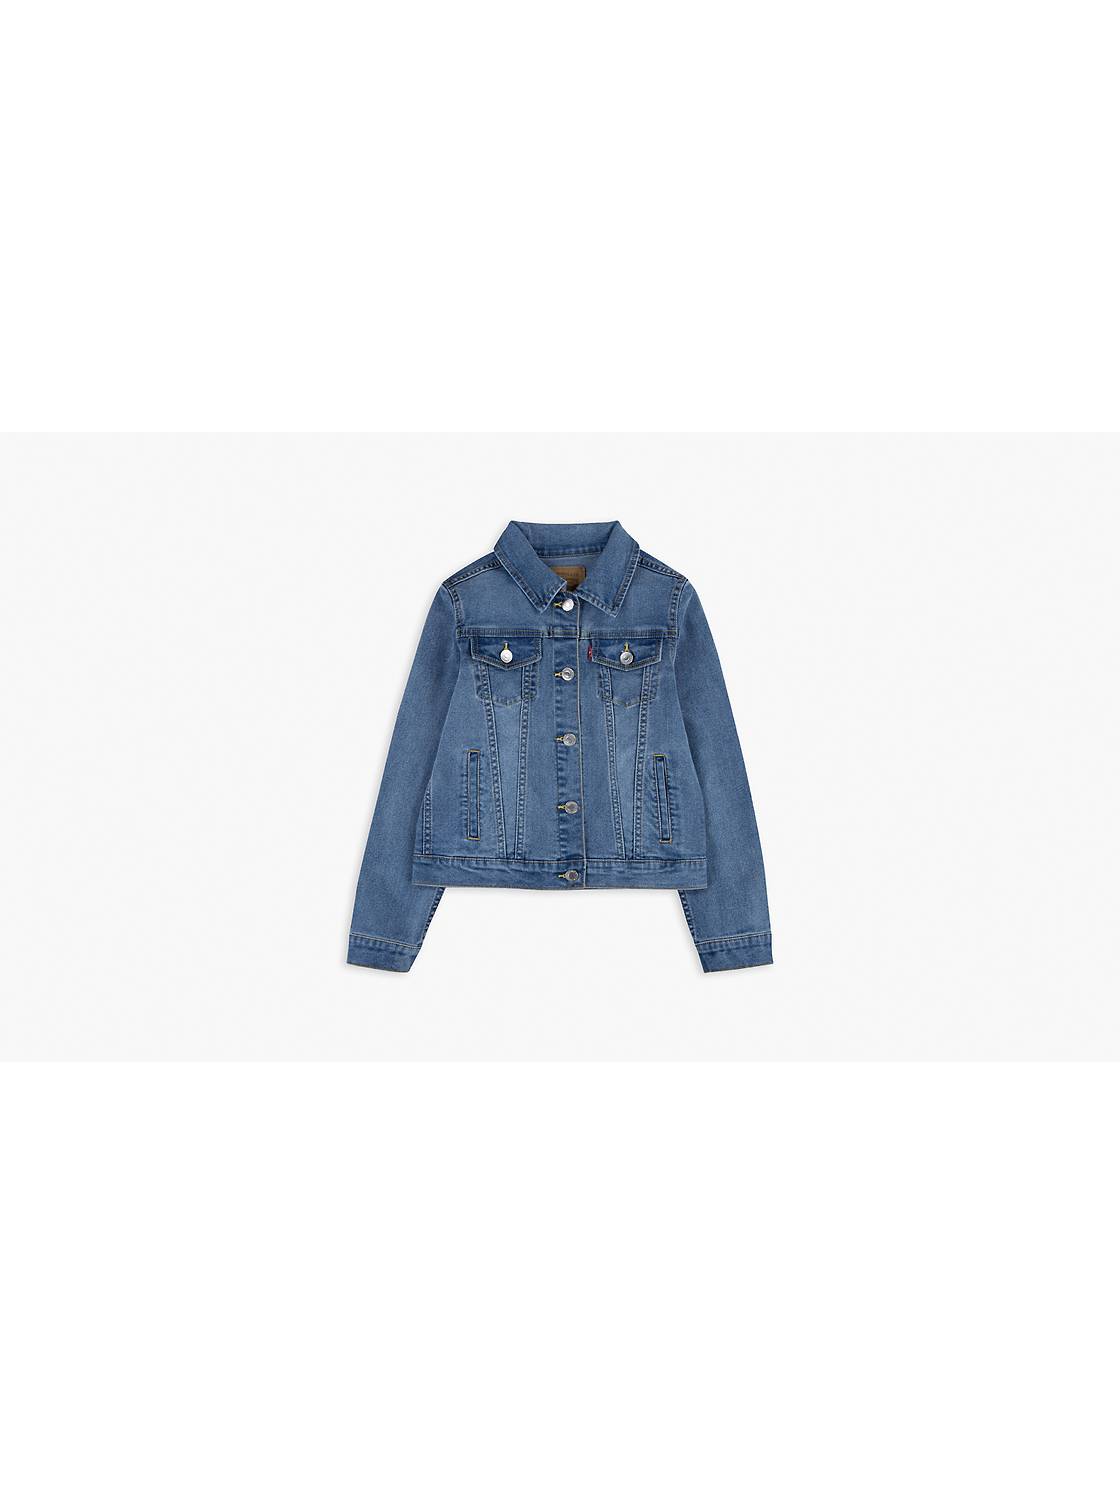 Clothes for Girls - Shop Cute Shirts, Jeans, Shorts & More | Levi's® US